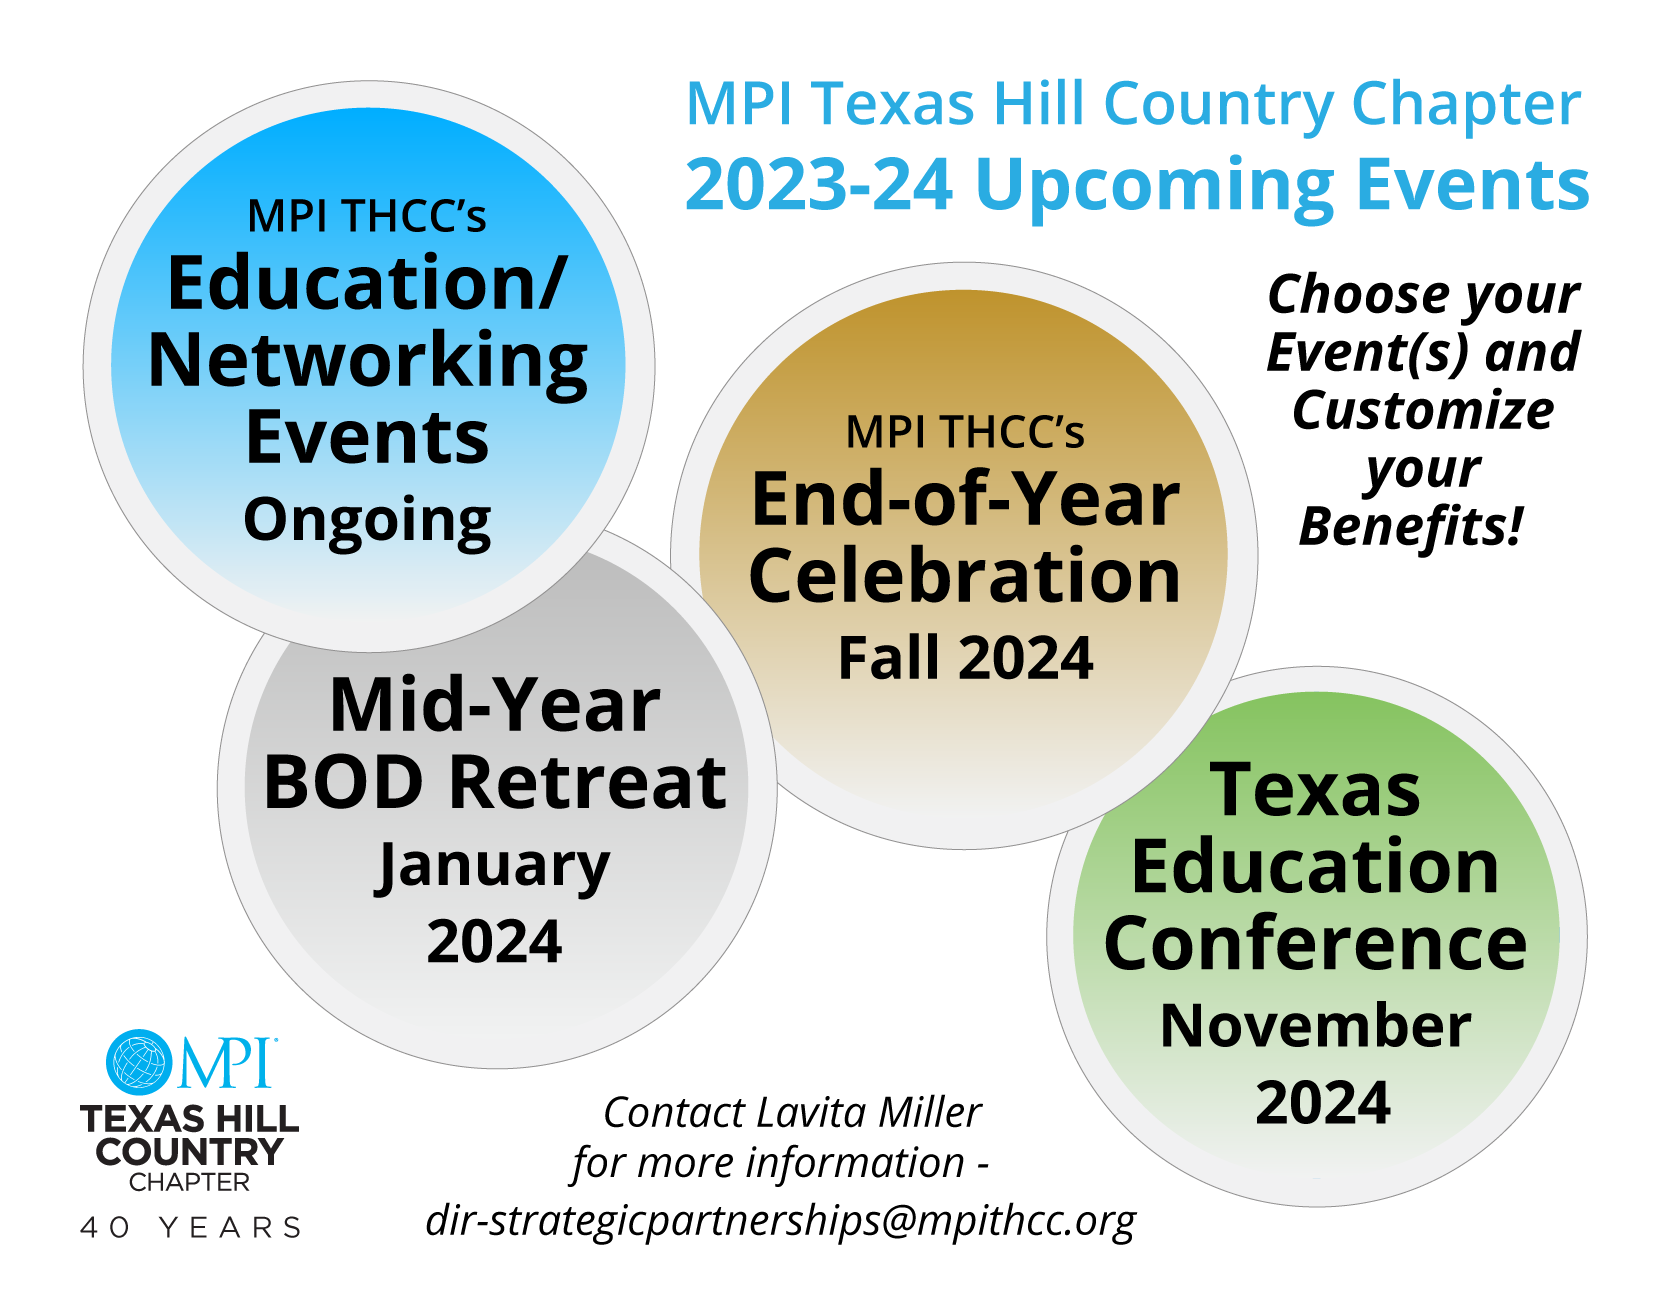 2023-24-Upcoming-Events-9-21-23